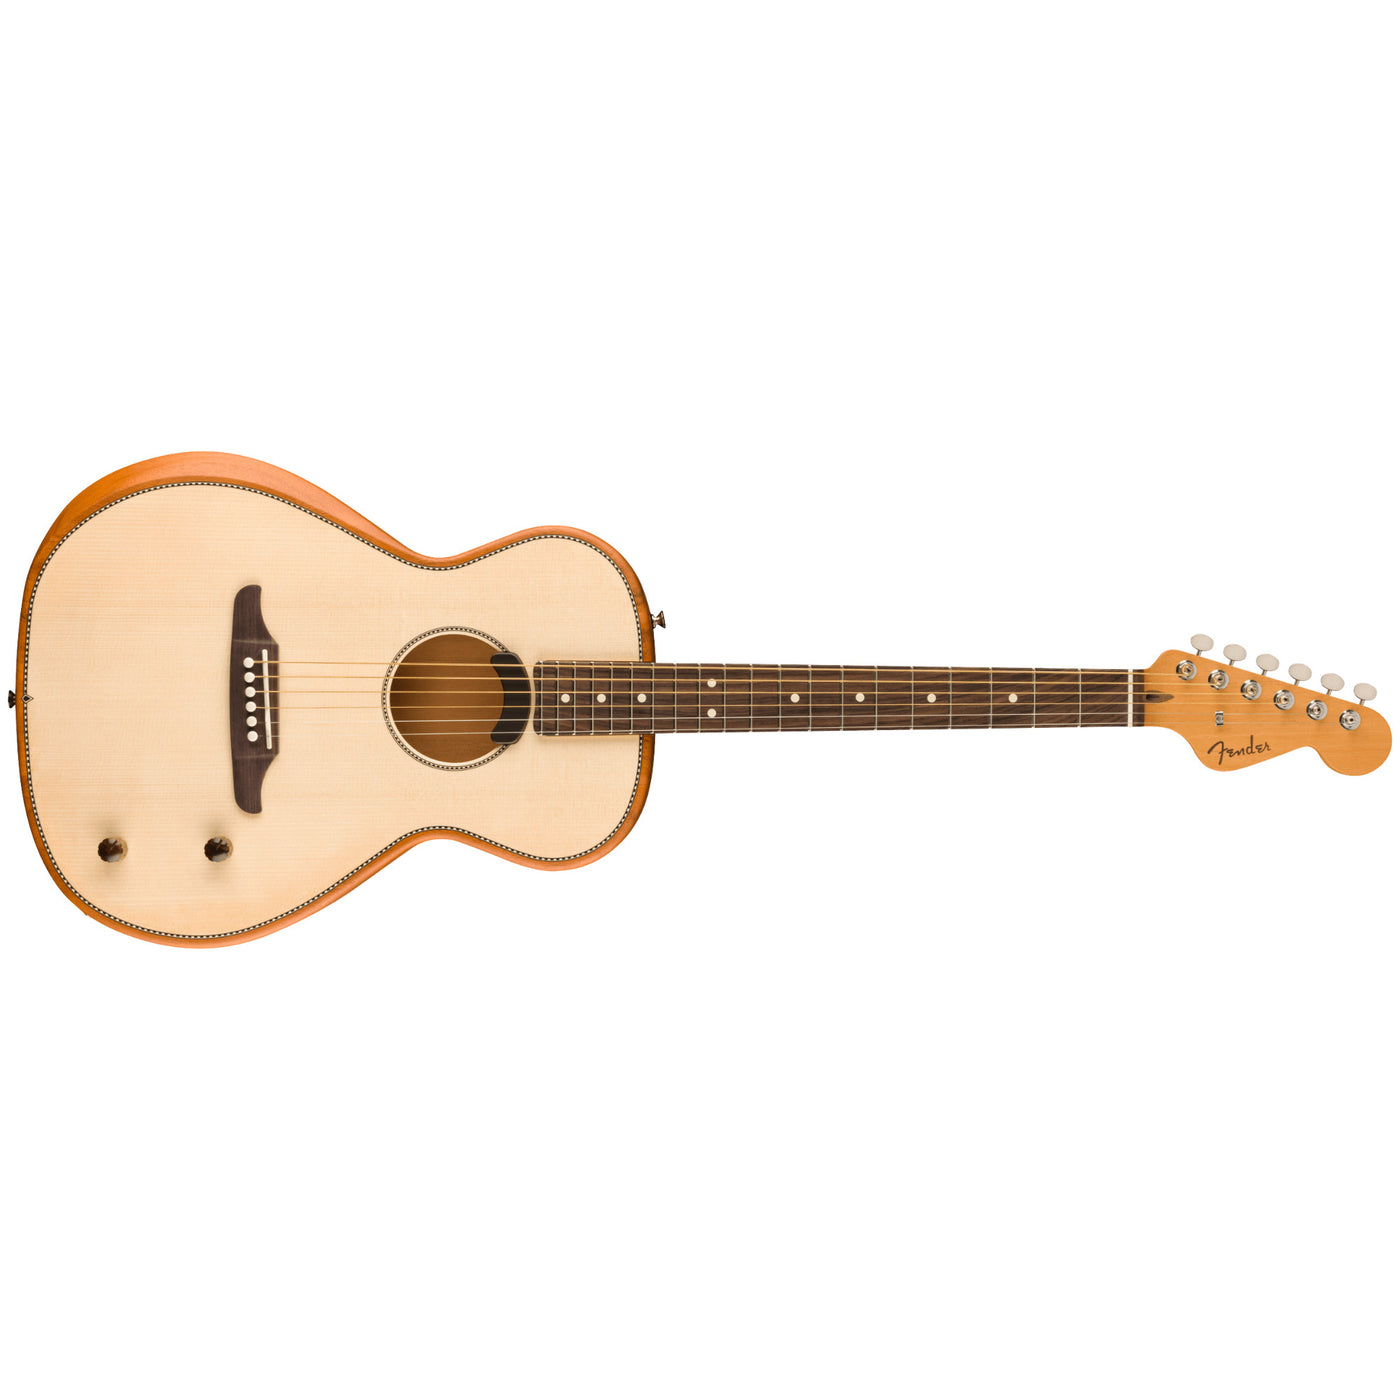 Fender Highway Series Dreadnought Acoustic Electric Guitar, Natural (0972512121)